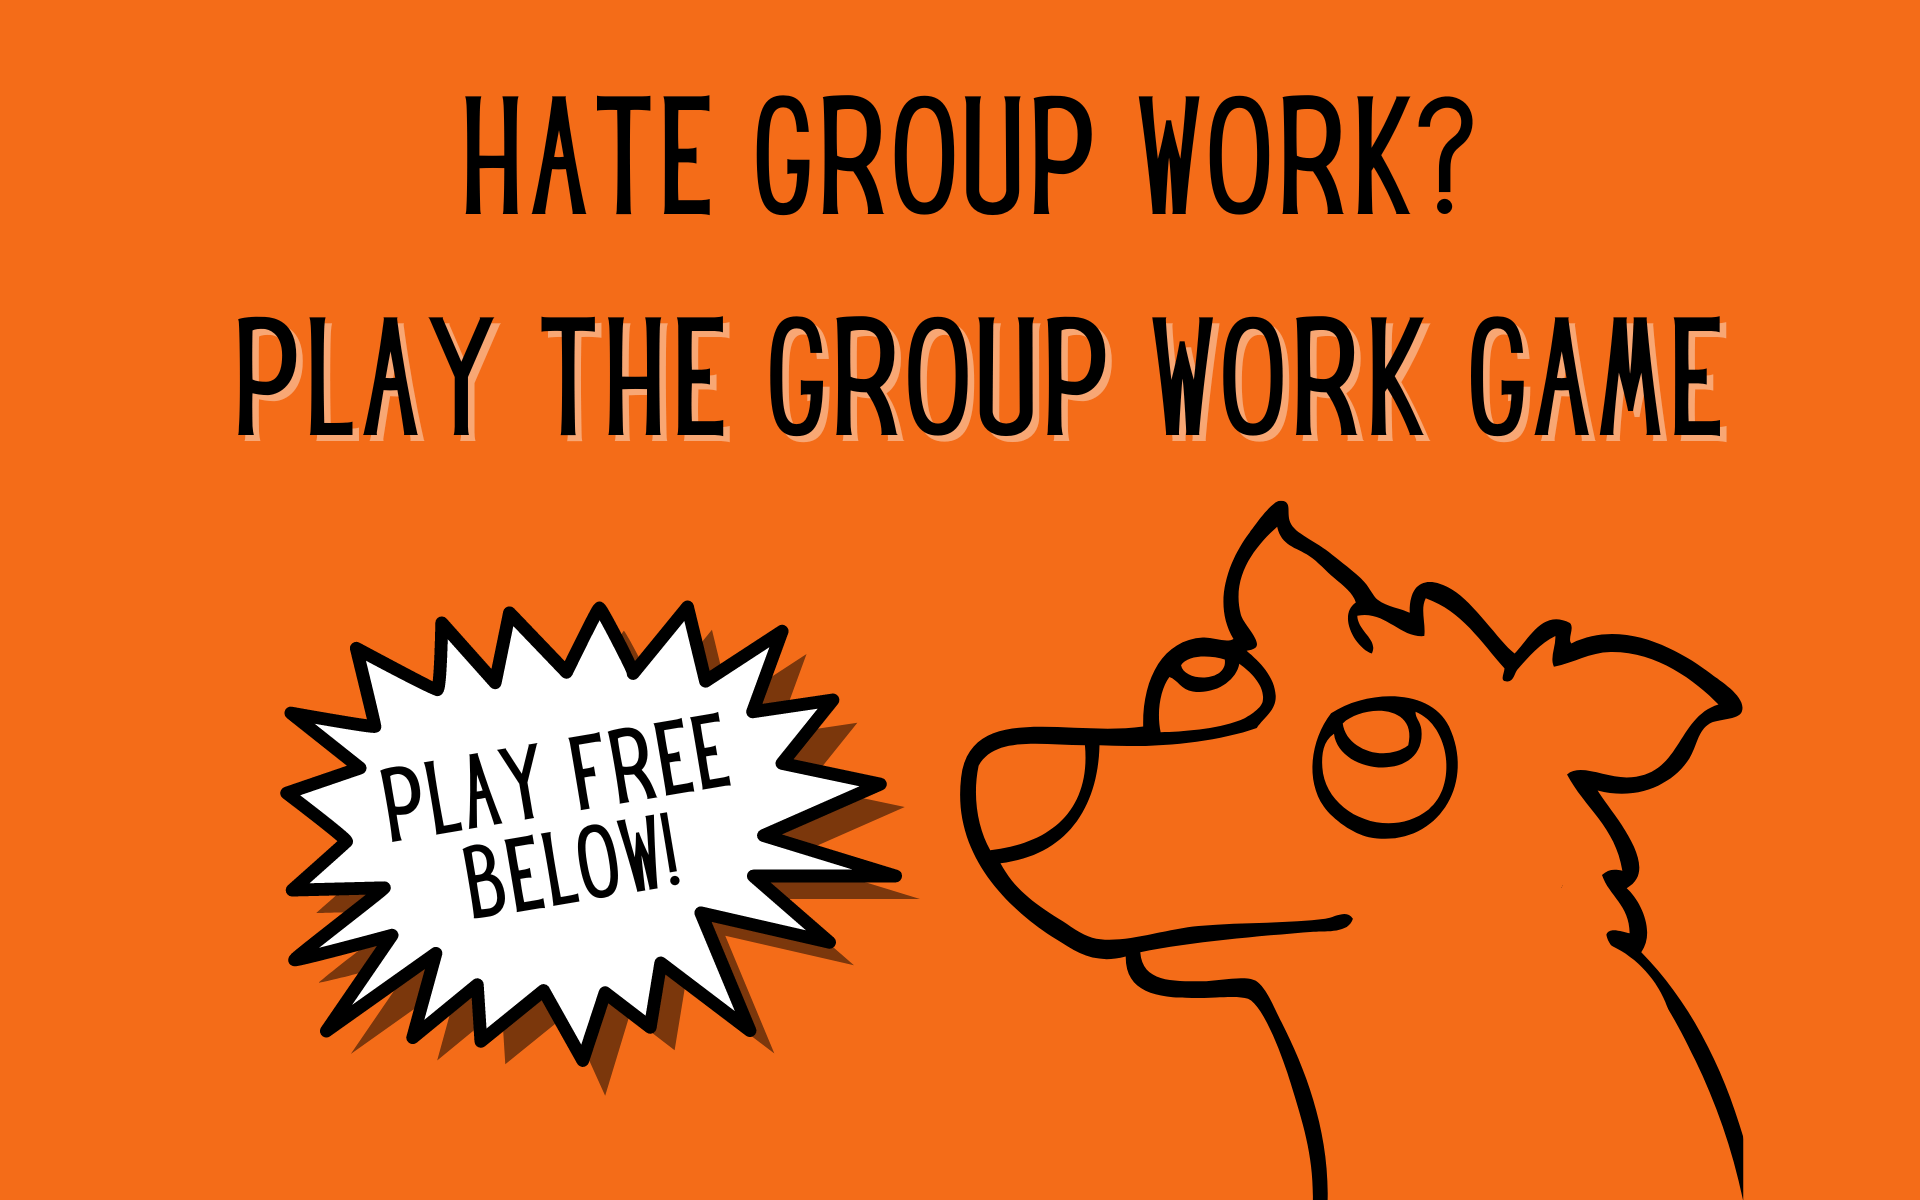 Friendly animal offers the chance to play The Group Work Game now